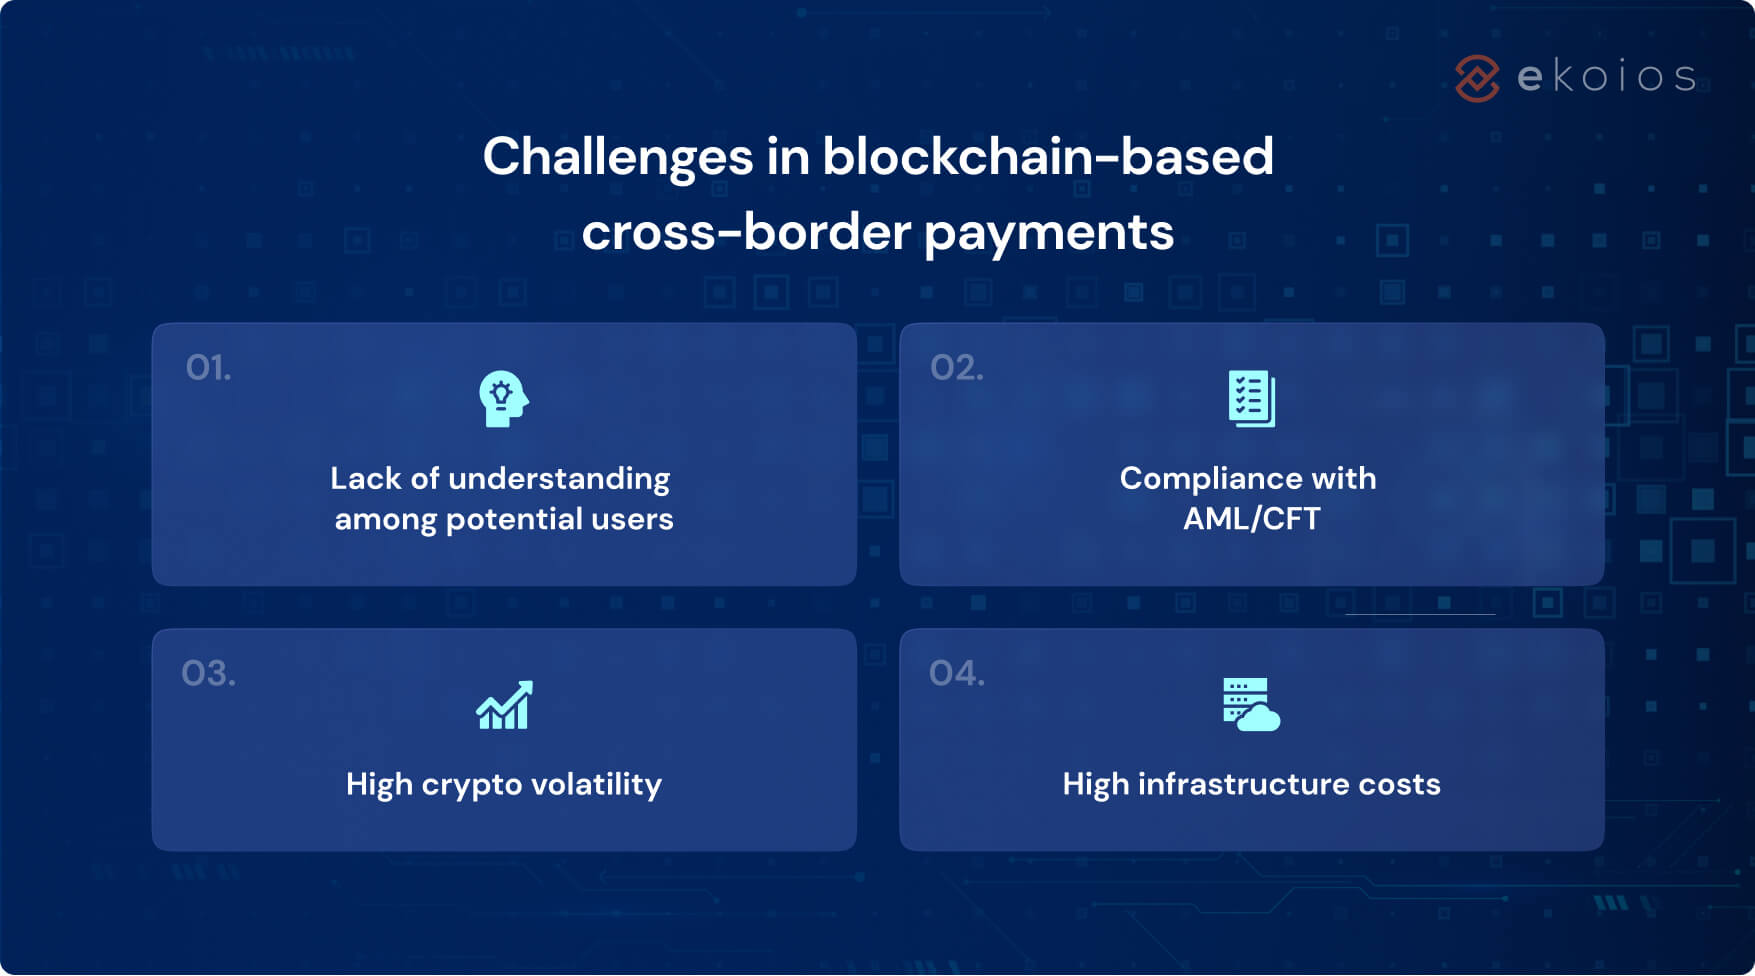 Challenges in blockchain-based cross-border payments